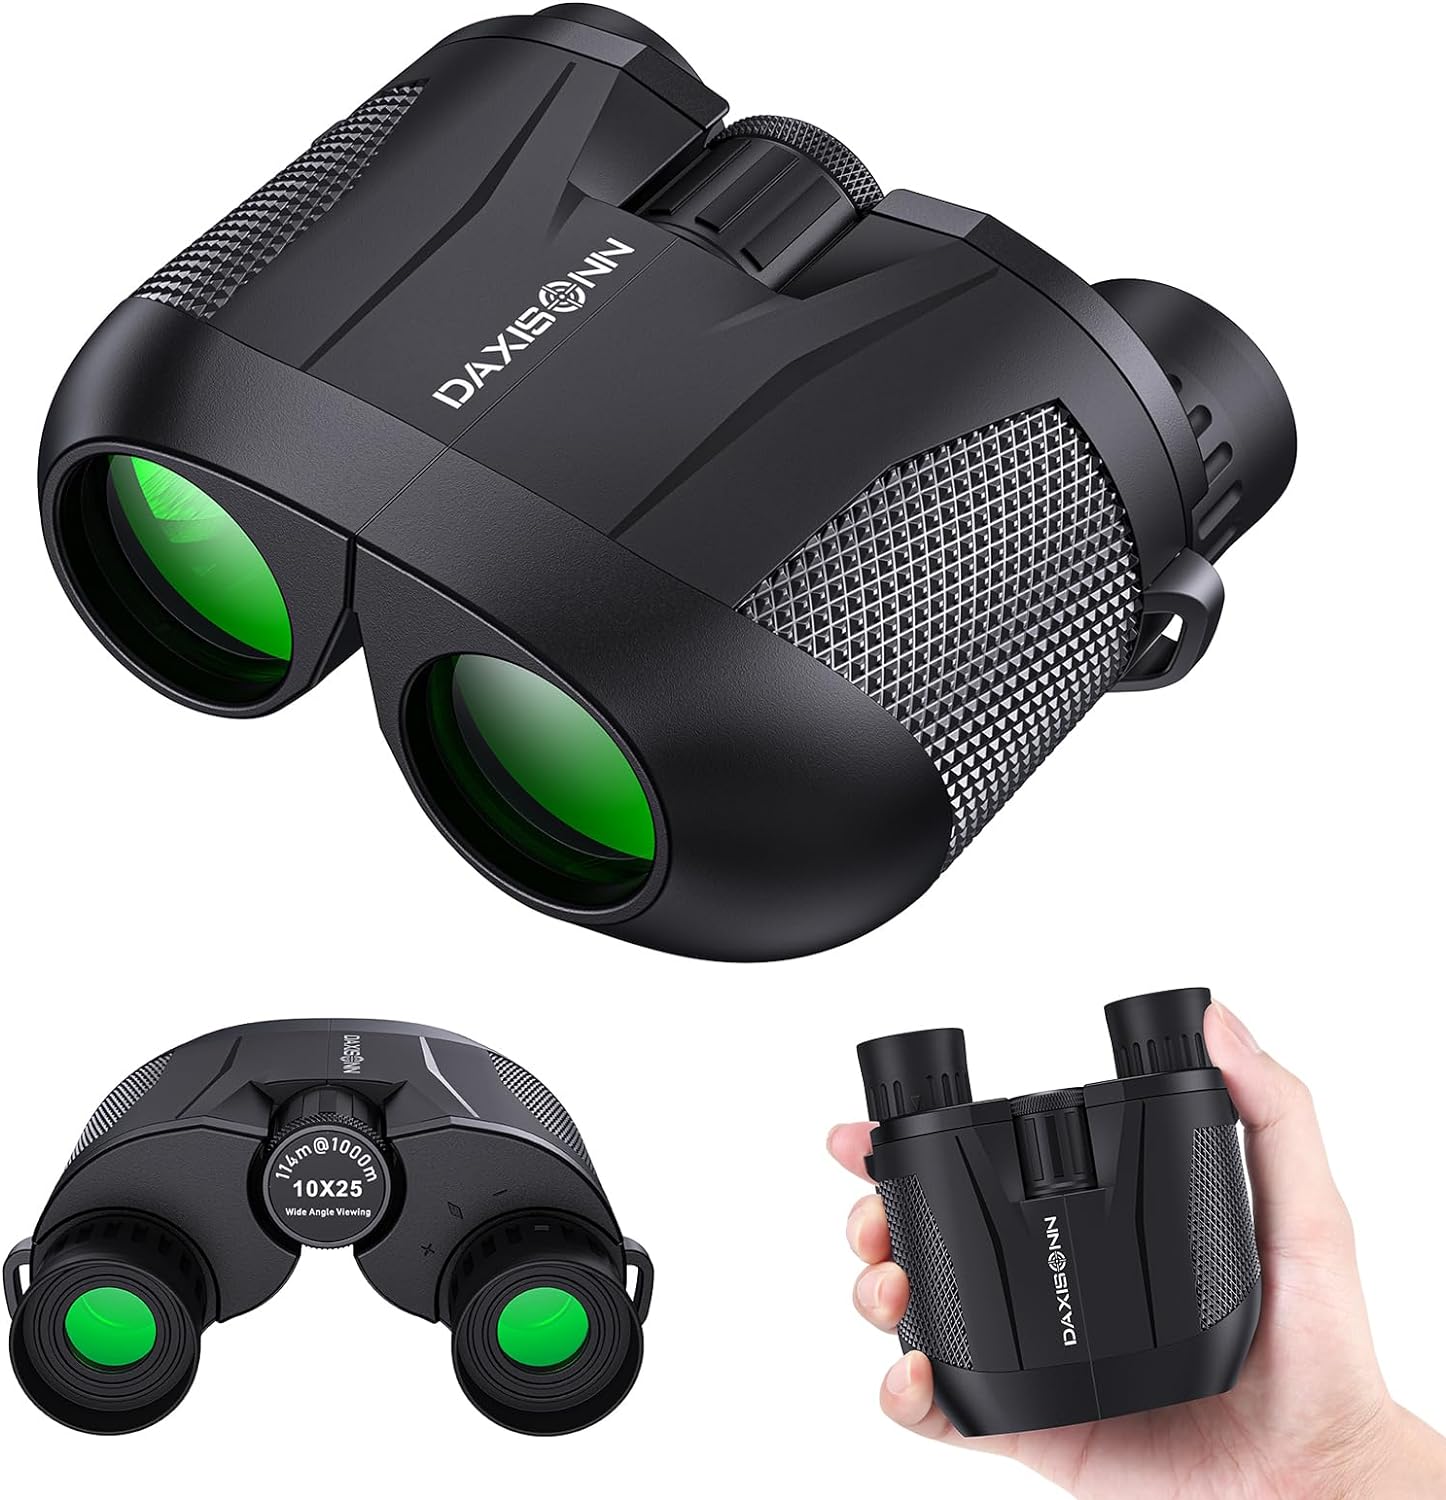 DAXISONN Compact Binoculars for Adults and Kids 10x25 High Powered Clear Lightweight Pocket Binoculars with Strap for Bird Watching Hunting Travel Sightseeing Hiking Theatre Concert Safari Outdoor